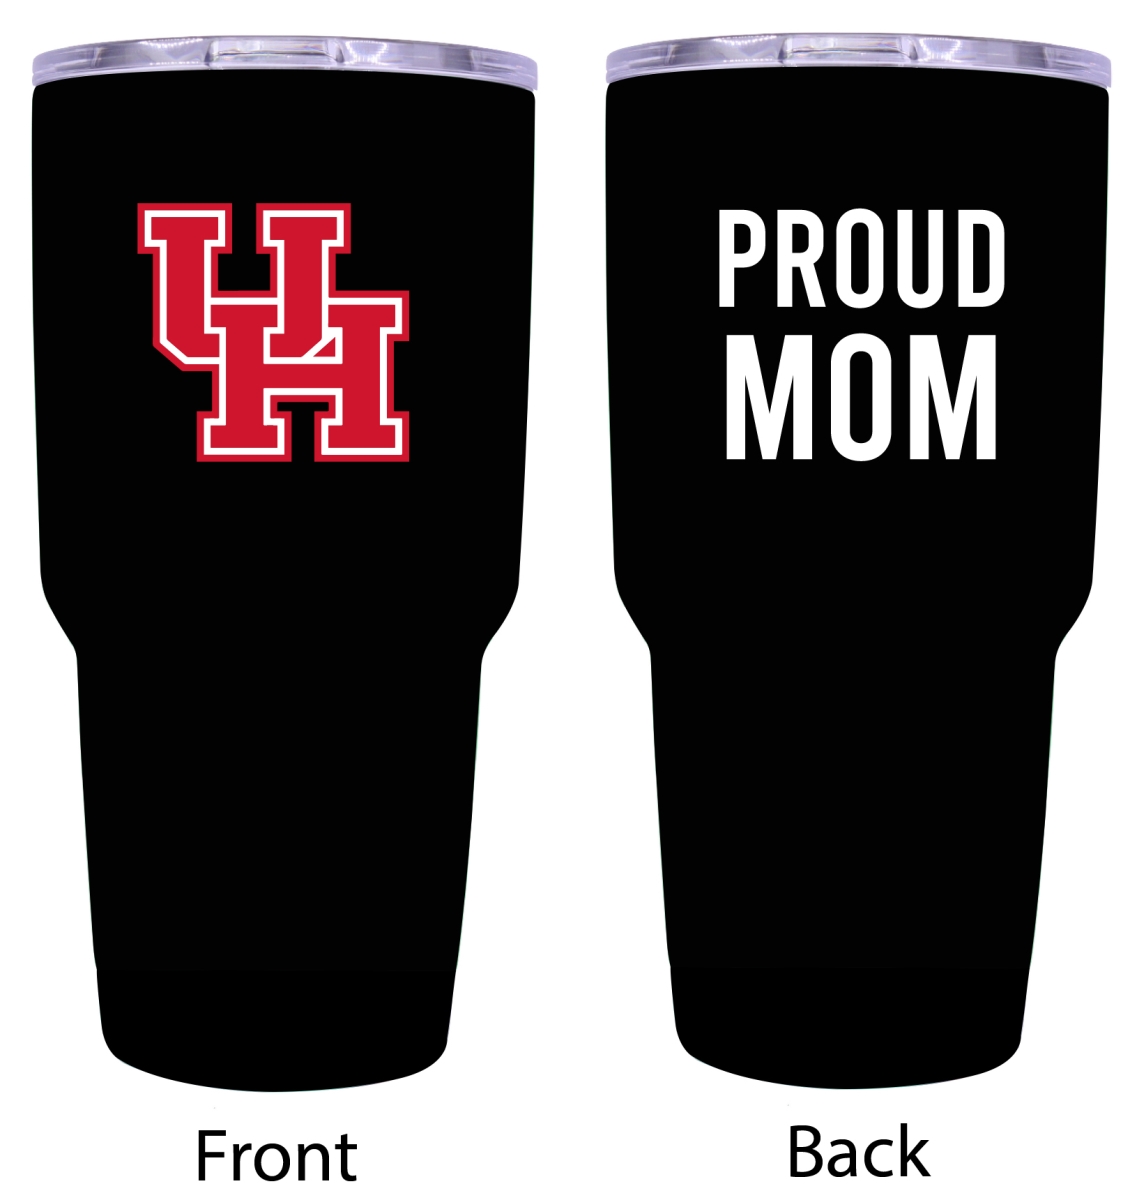 Picture of R & R Imports ITB-C-HOUS20 MOM University of Houston Proud Mom 20 oz Insulated Stainless Steel Tumblers